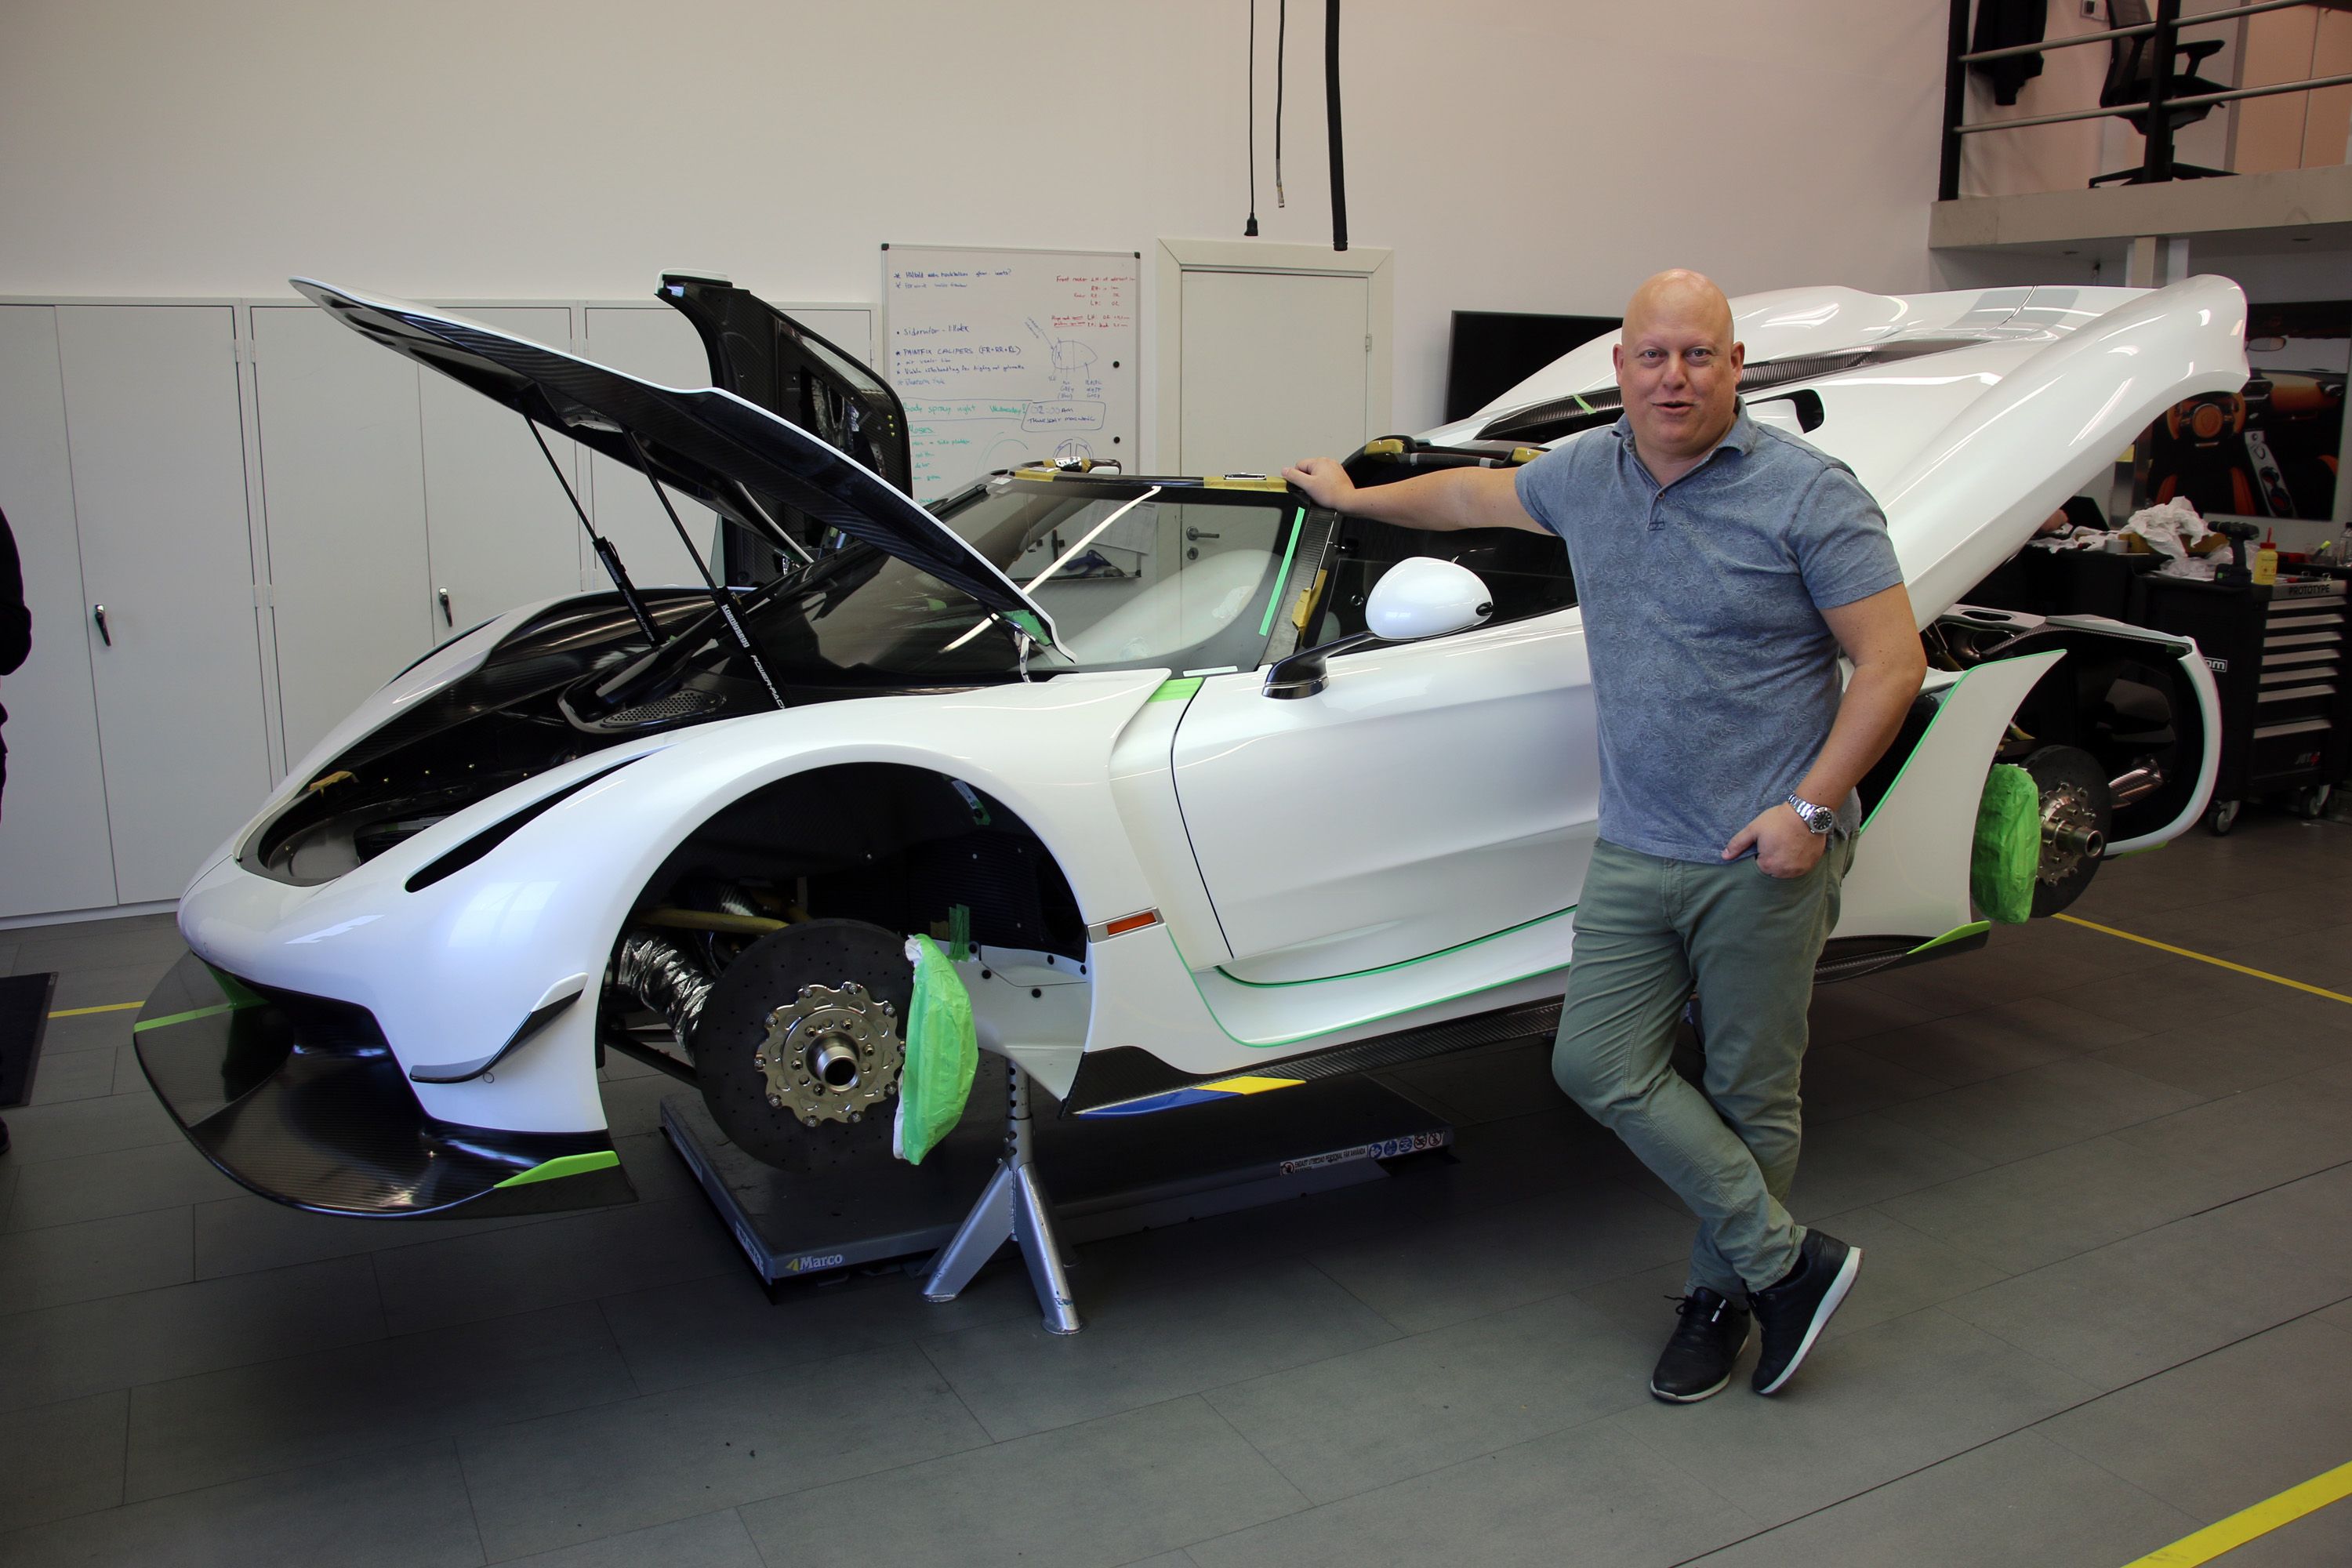 The Koenigsegg Jesko Has 1600 HP and Promises a 300-MPH Top Speed